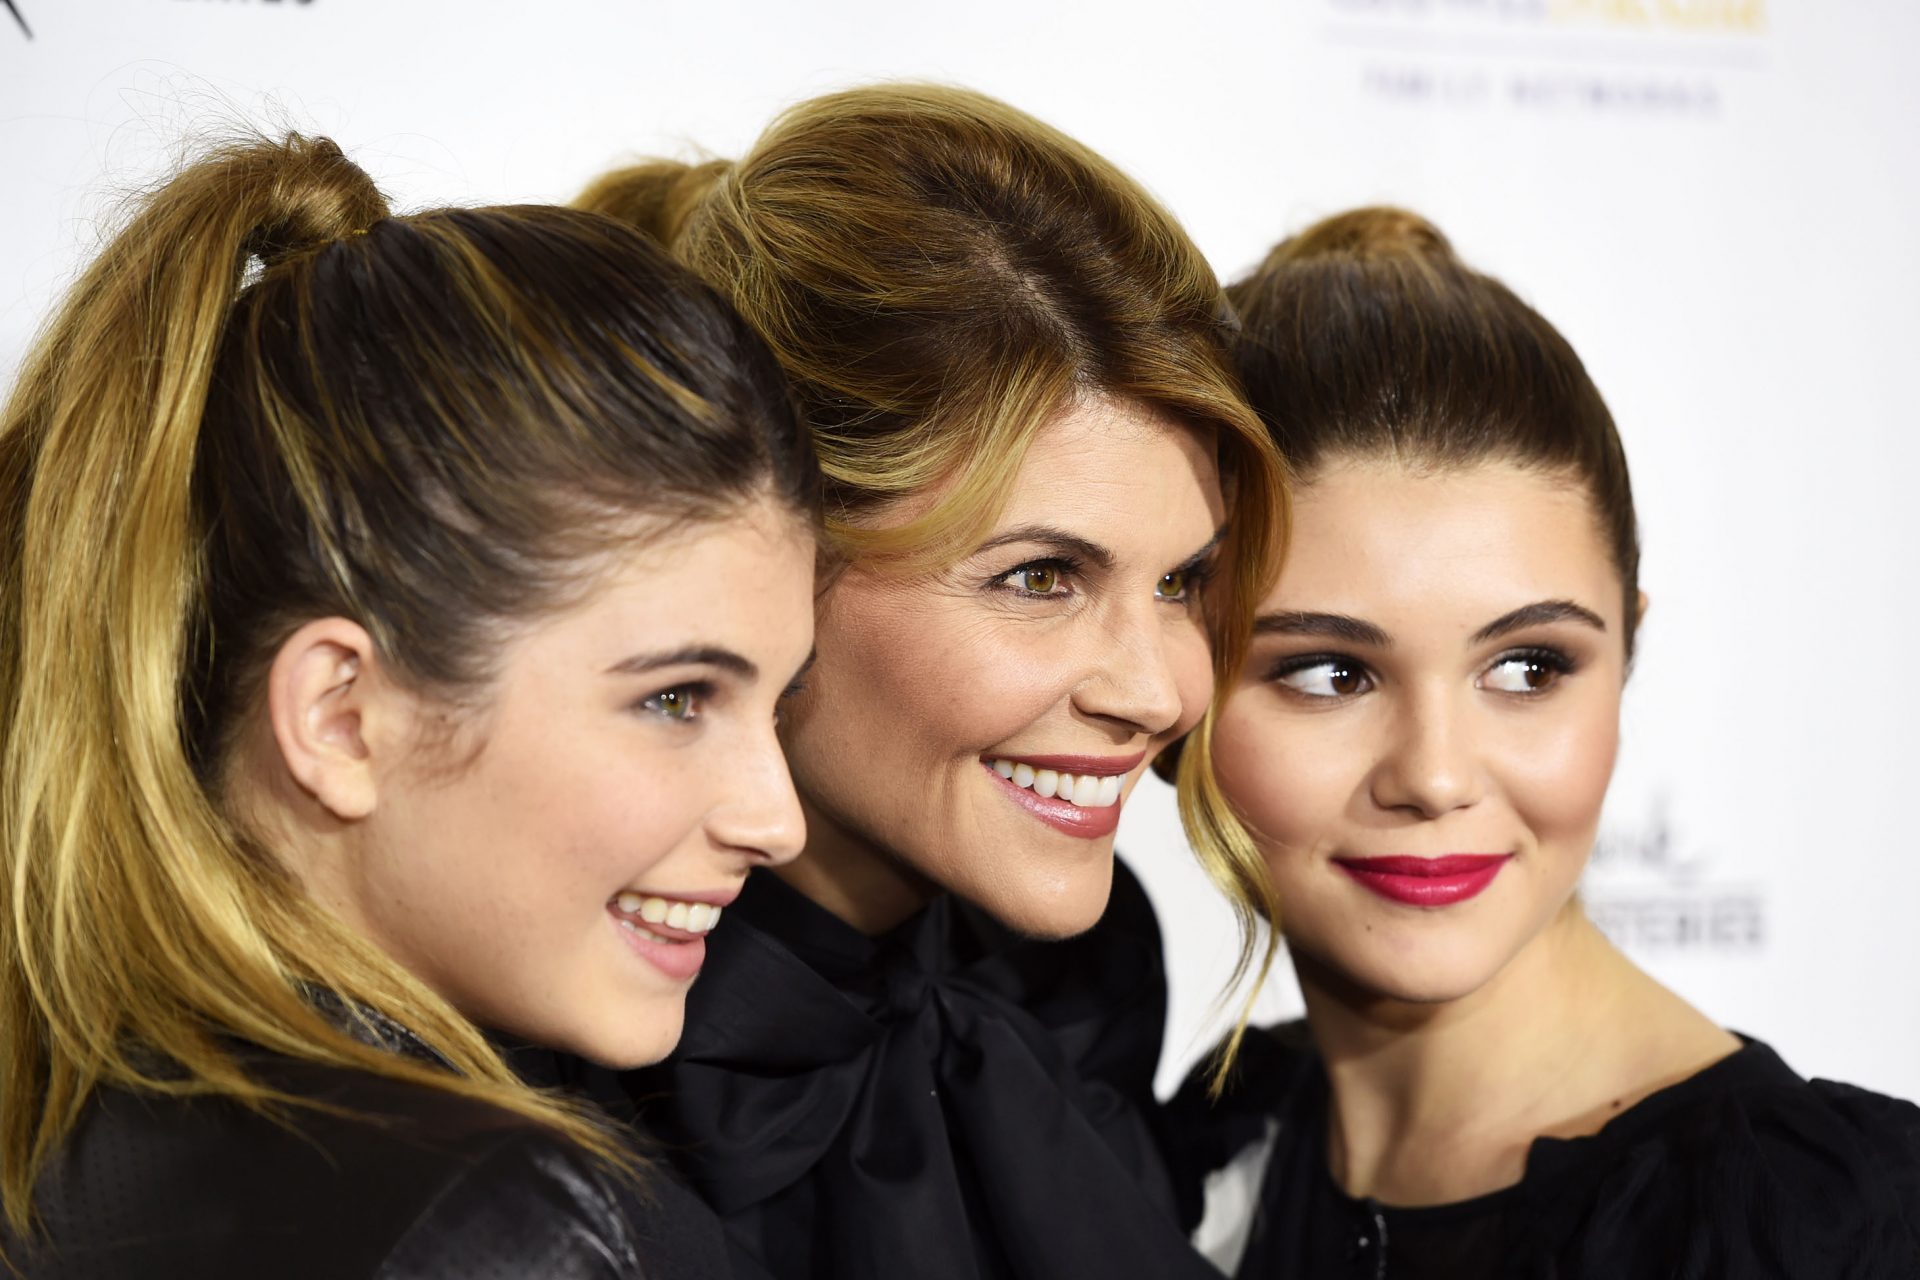 Olivia and Isabella, the daughters Lori Loughlin tried to get into college